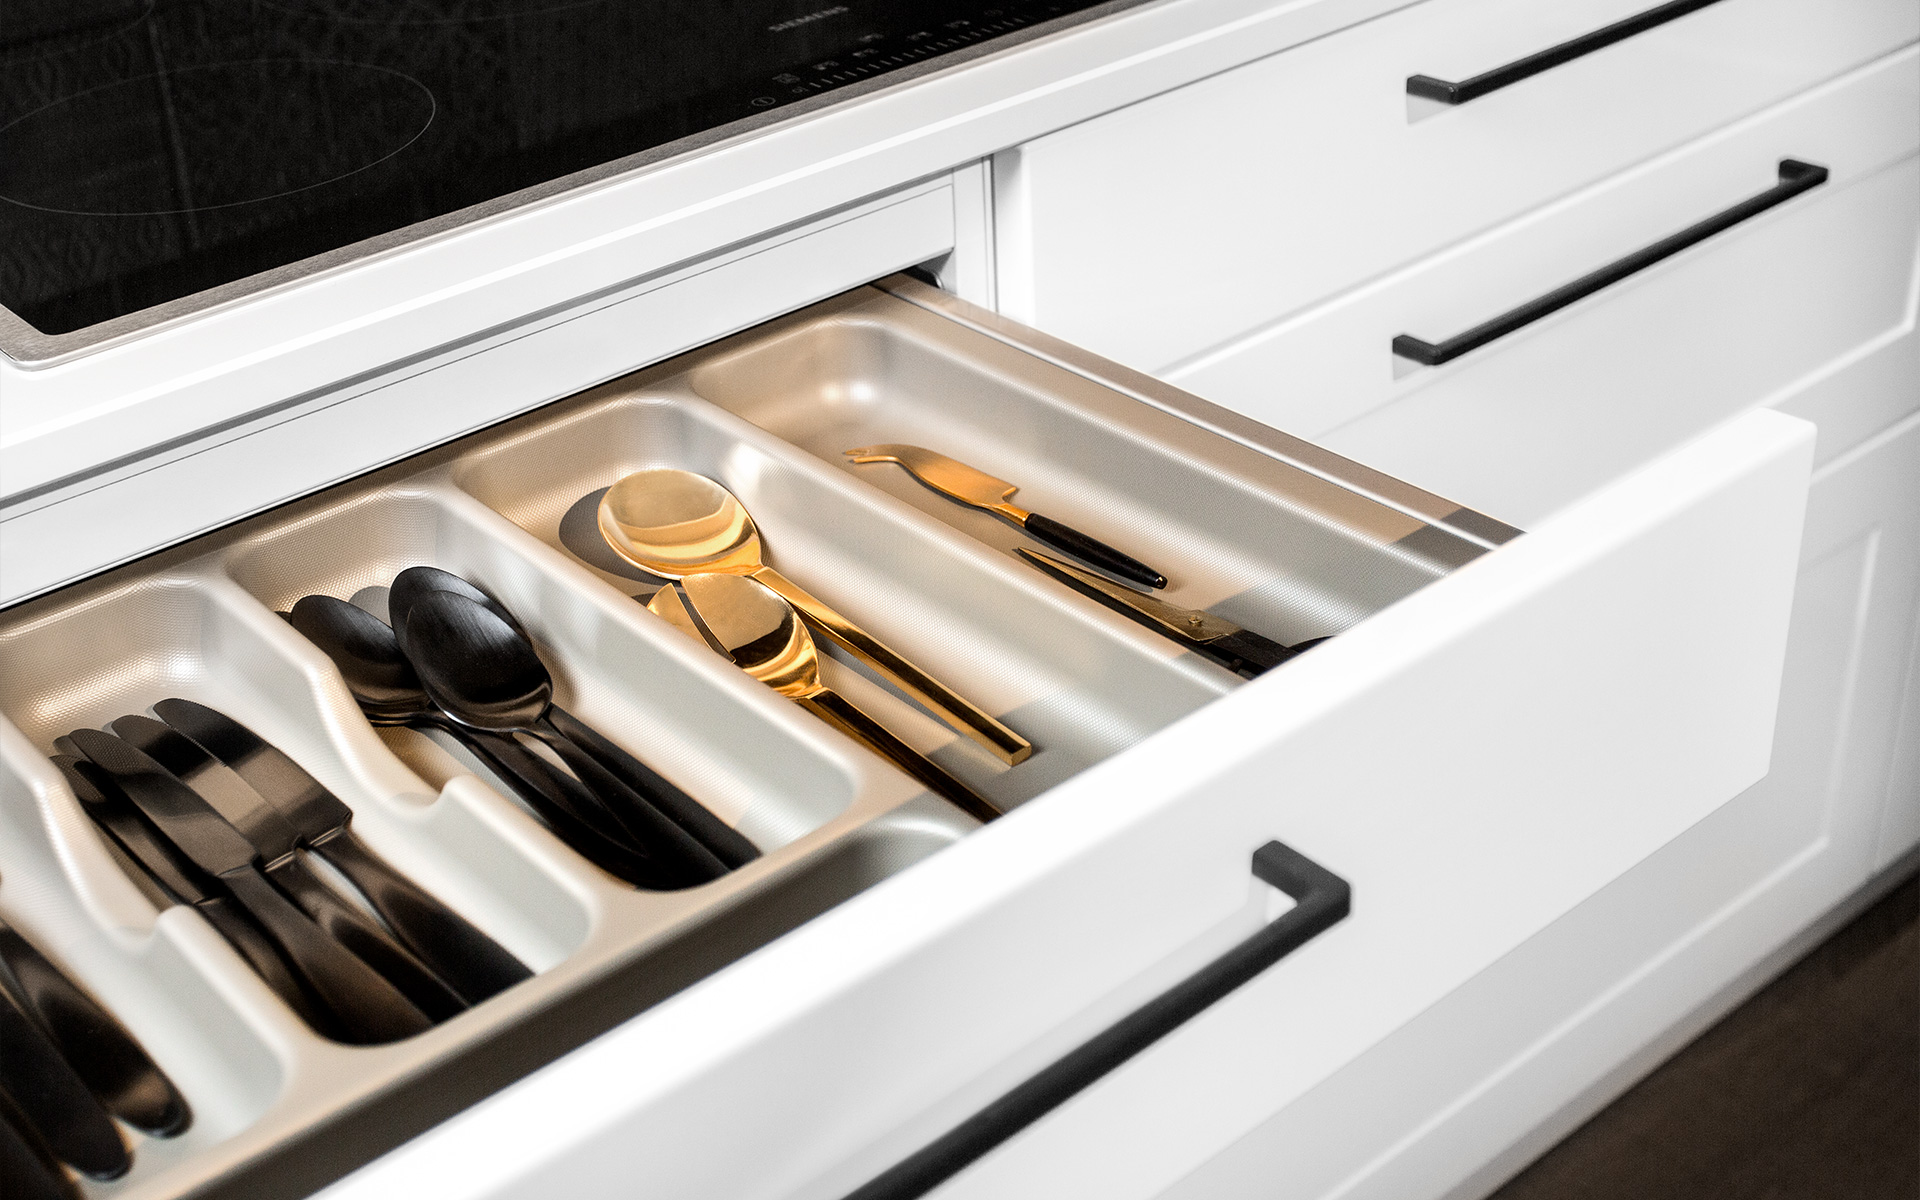 Interior organisation from Häcker for your new kitchen. Your kitchen  becomes a spatial miracle with smart organisation